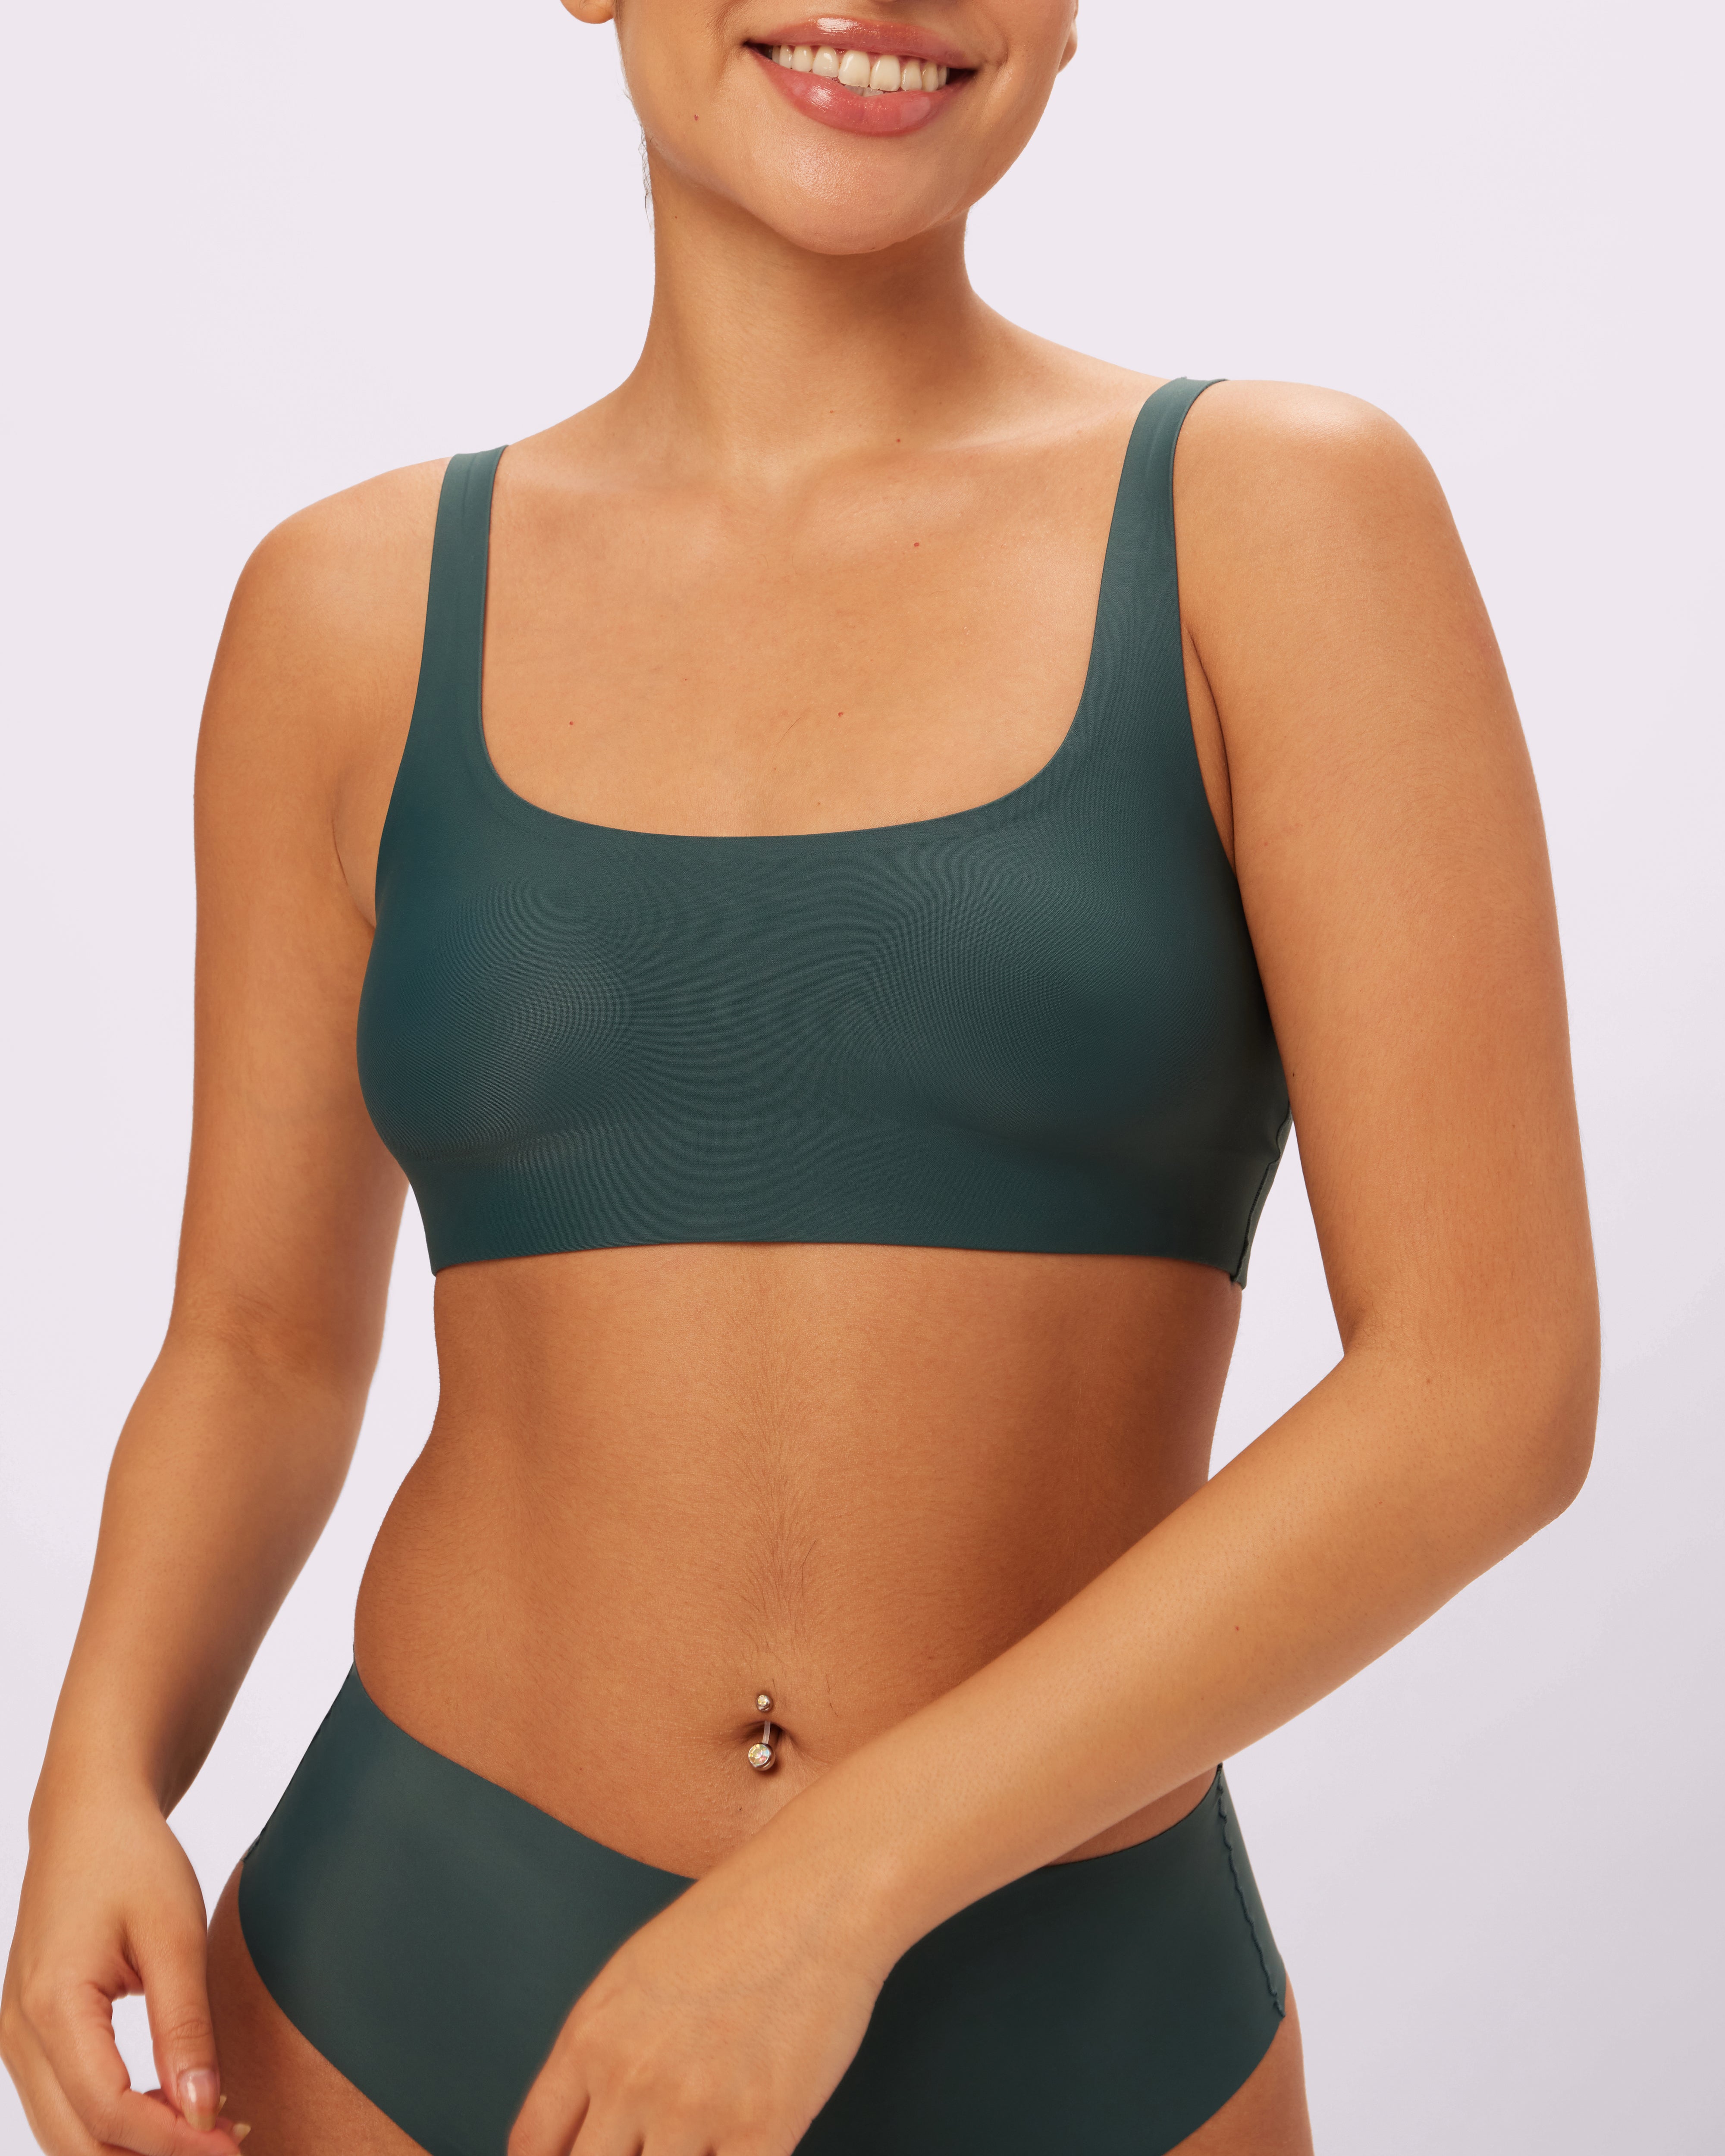 Elite Life Seamless, Non-marking, Sponge Supported Bustier